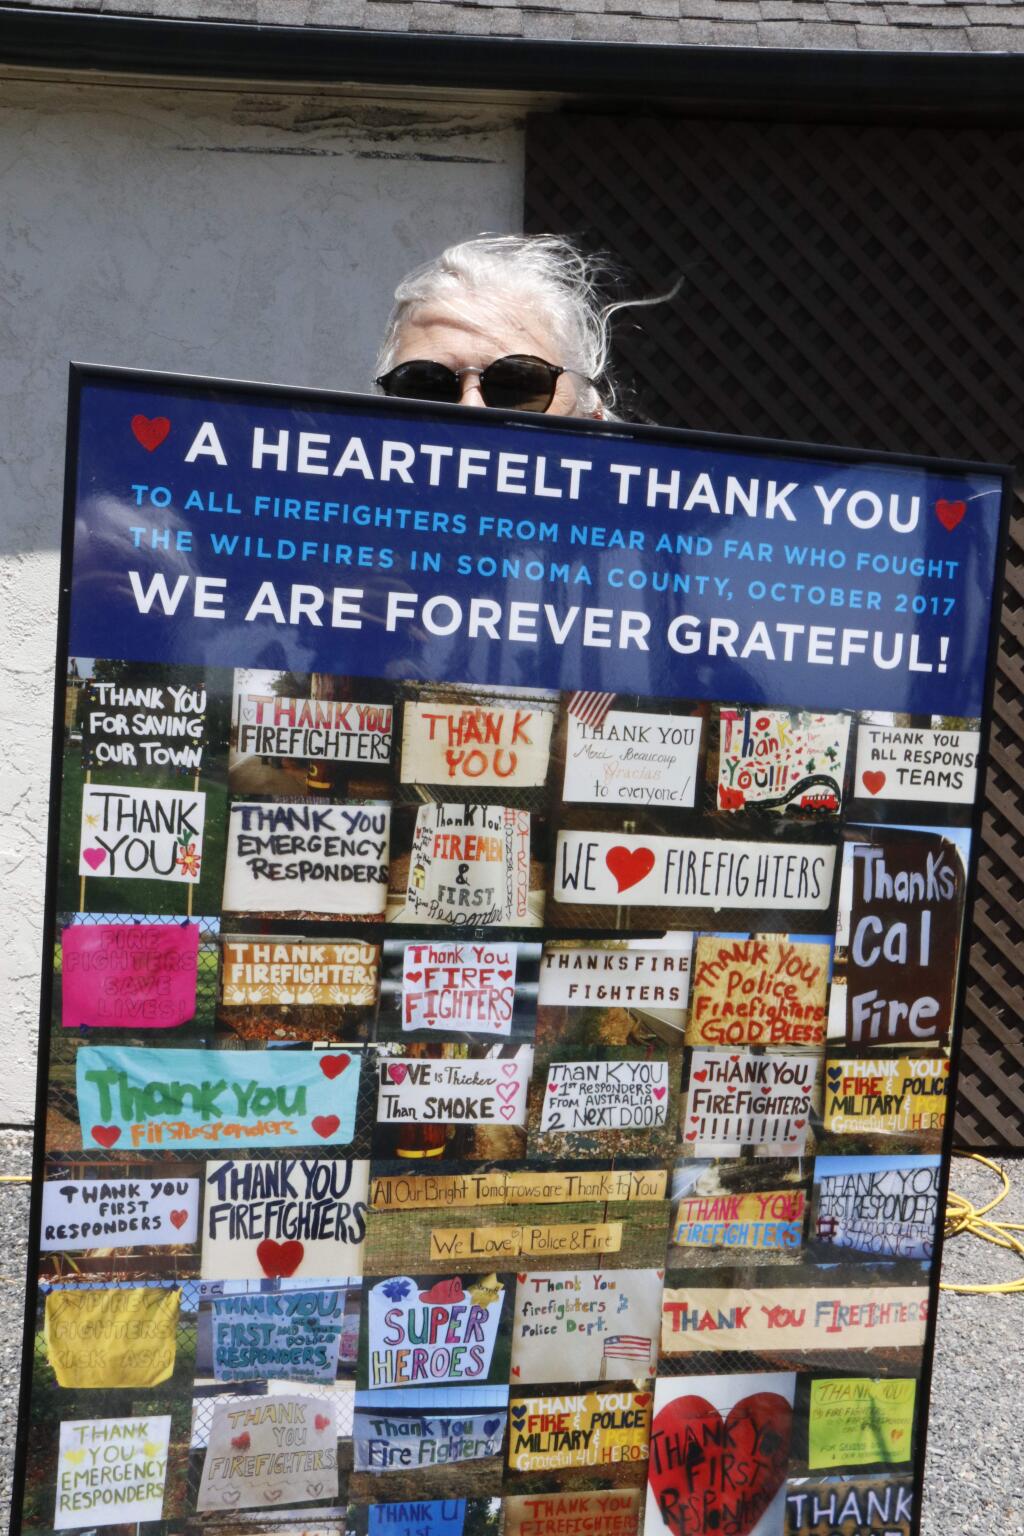 A display of cards from well-wishers to the Mayacamas Volunteer Fire Department is shared at the MVFD's annual community picnic, July 9, 2018. (Christian Kallen/Index-Tribune)